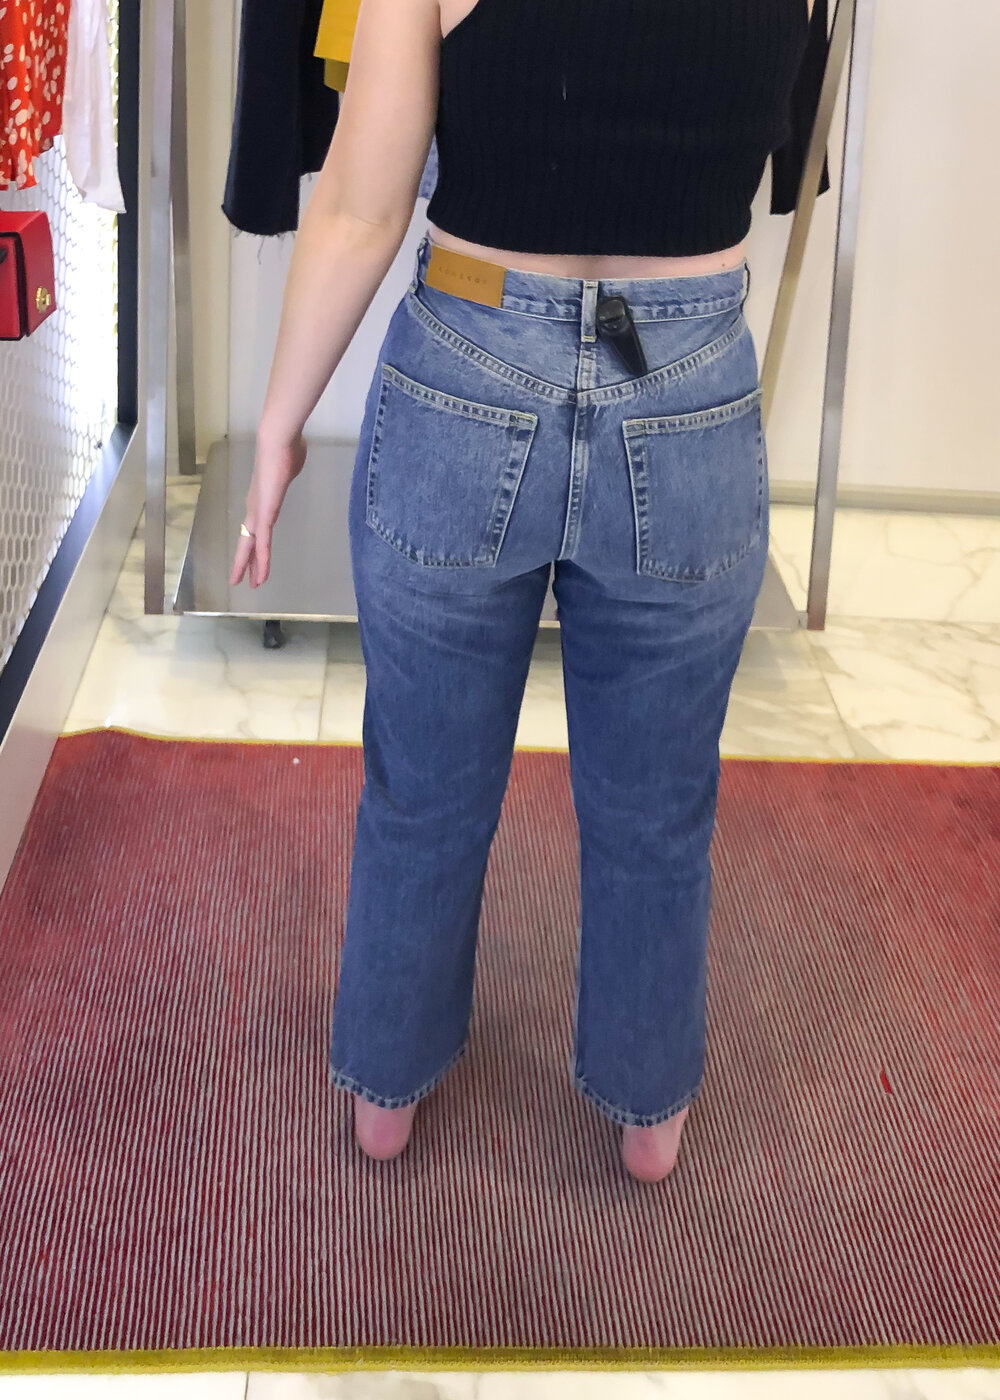 THE BEST AND WORST TOPSHOP JEANS FOR PETITES — The Petite Pear Project